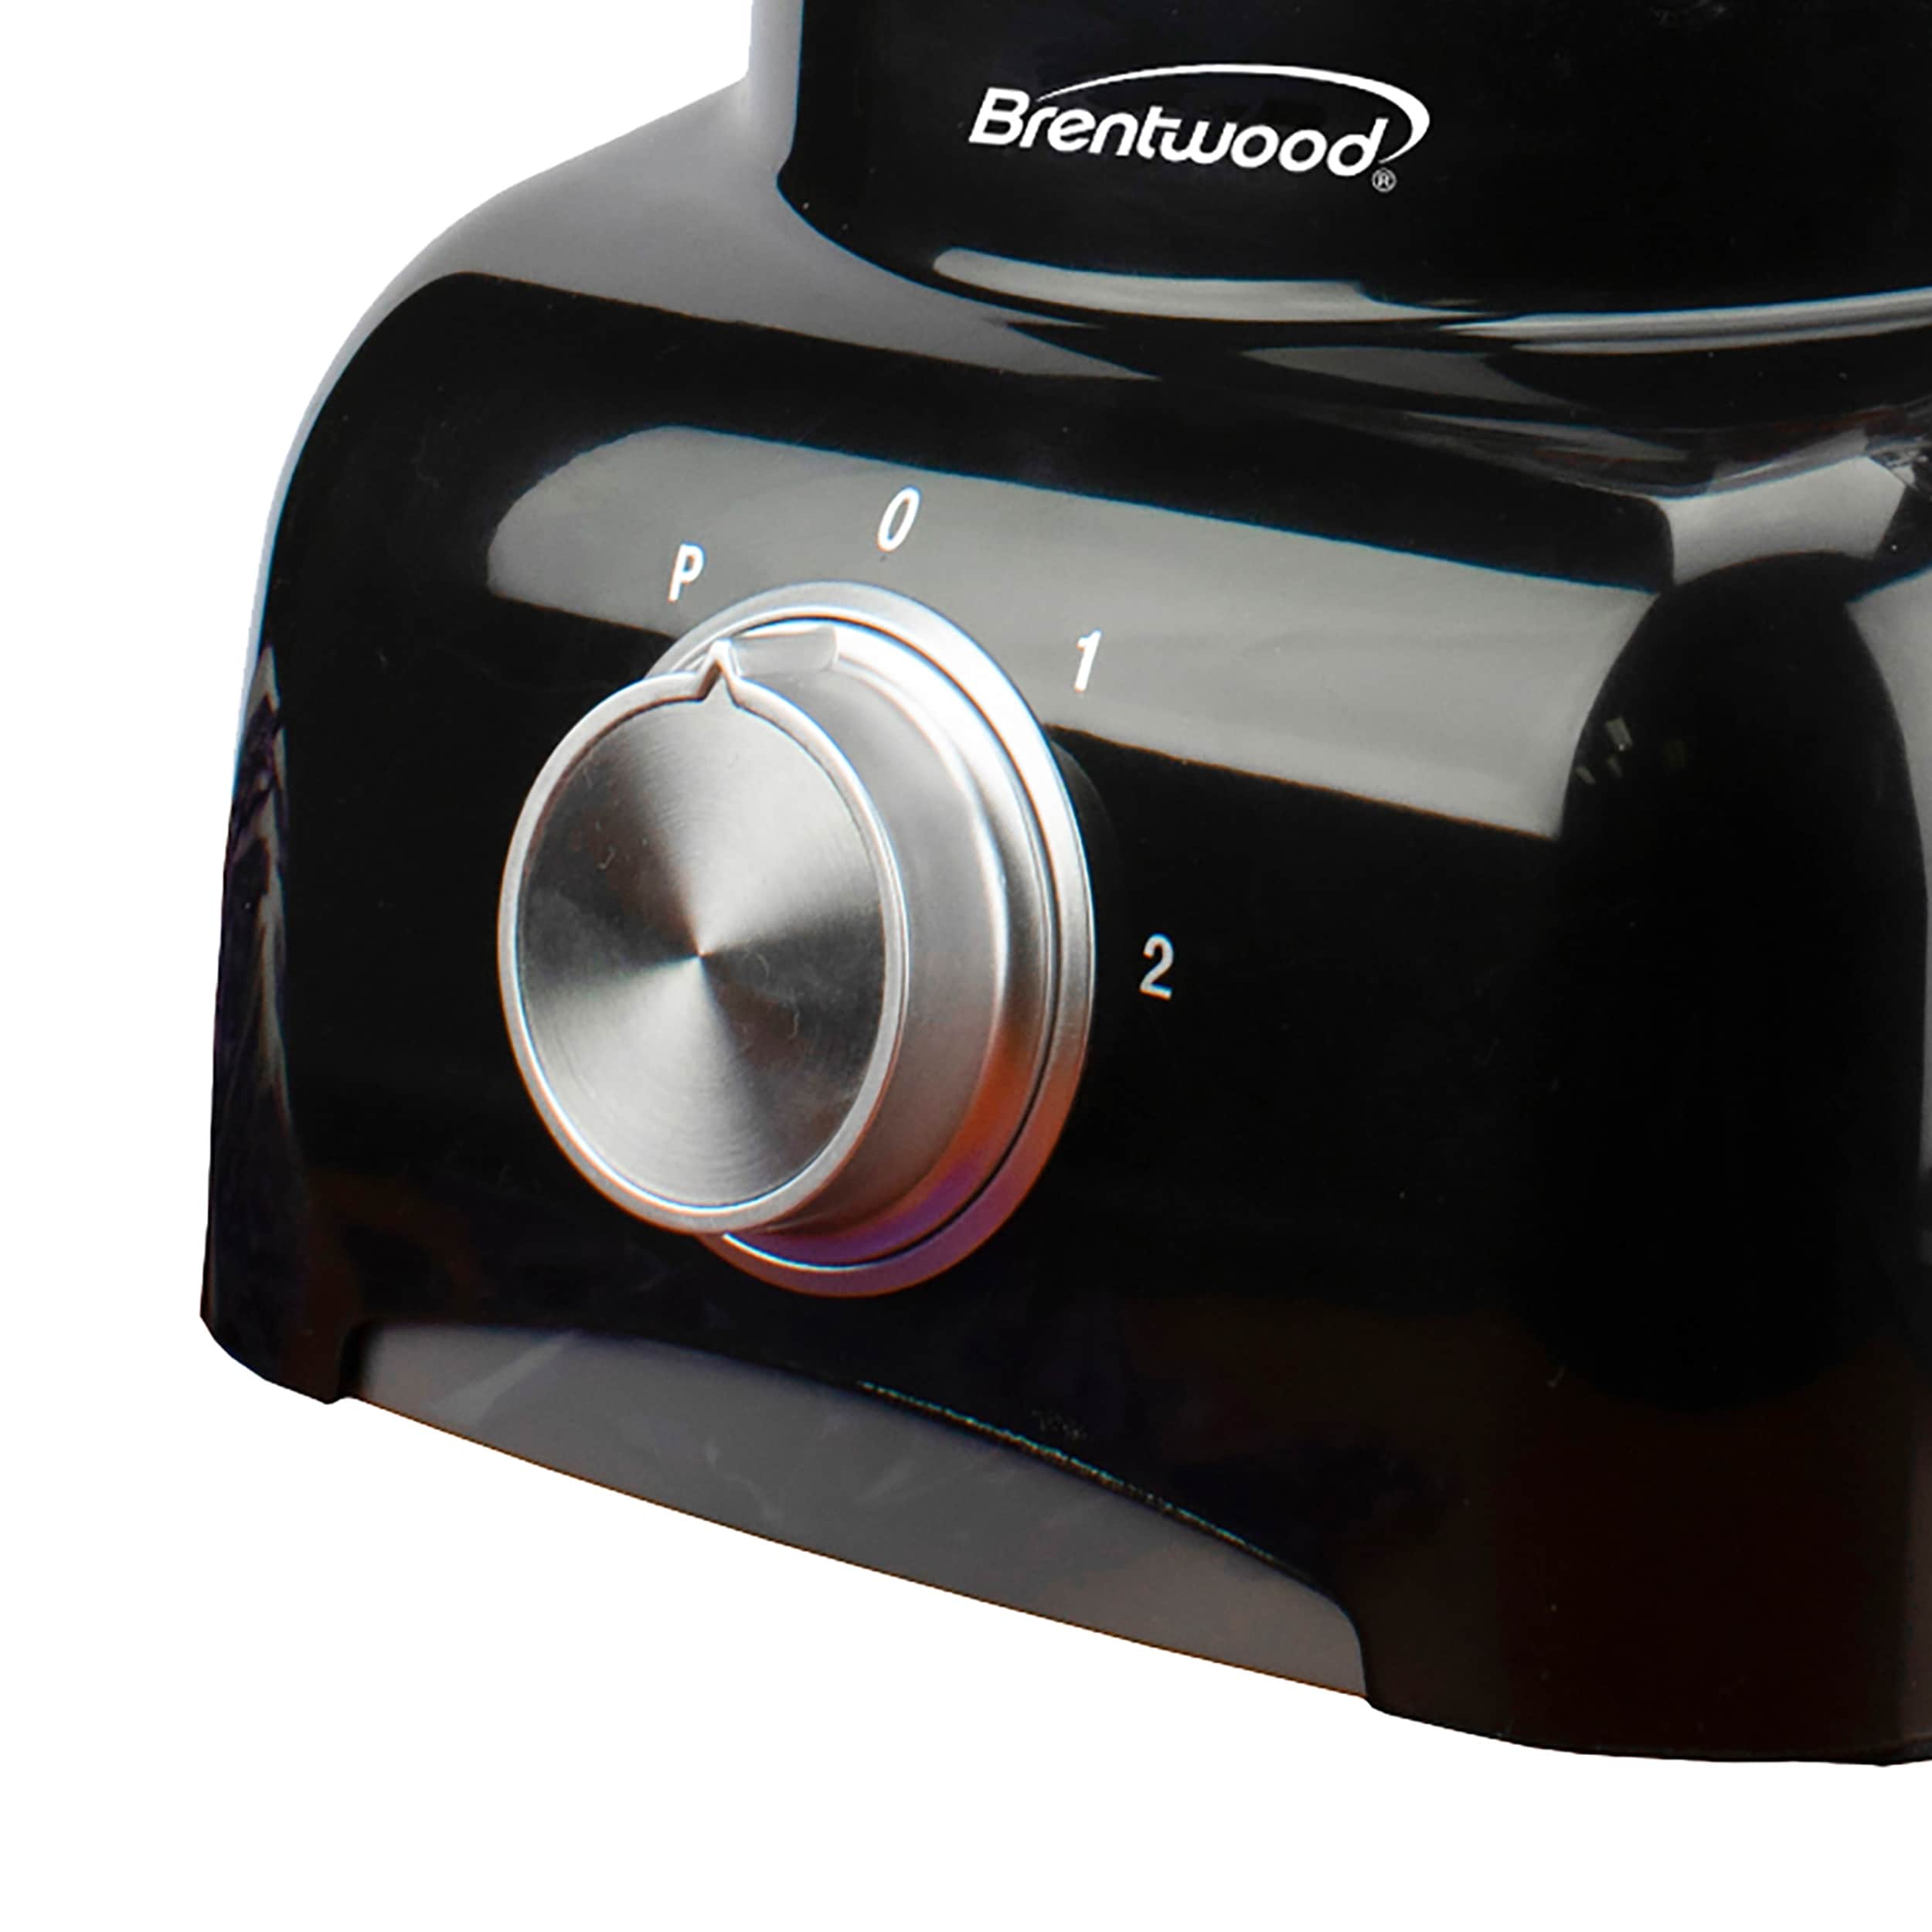 https://ak1.ostkcdn.com/images/products/is/images/direct/cc3a23accf3c29578aaf6a2b0467745dfa2d897e/Brentwood-5-Cup-Food-Processor-in-Black.jpg